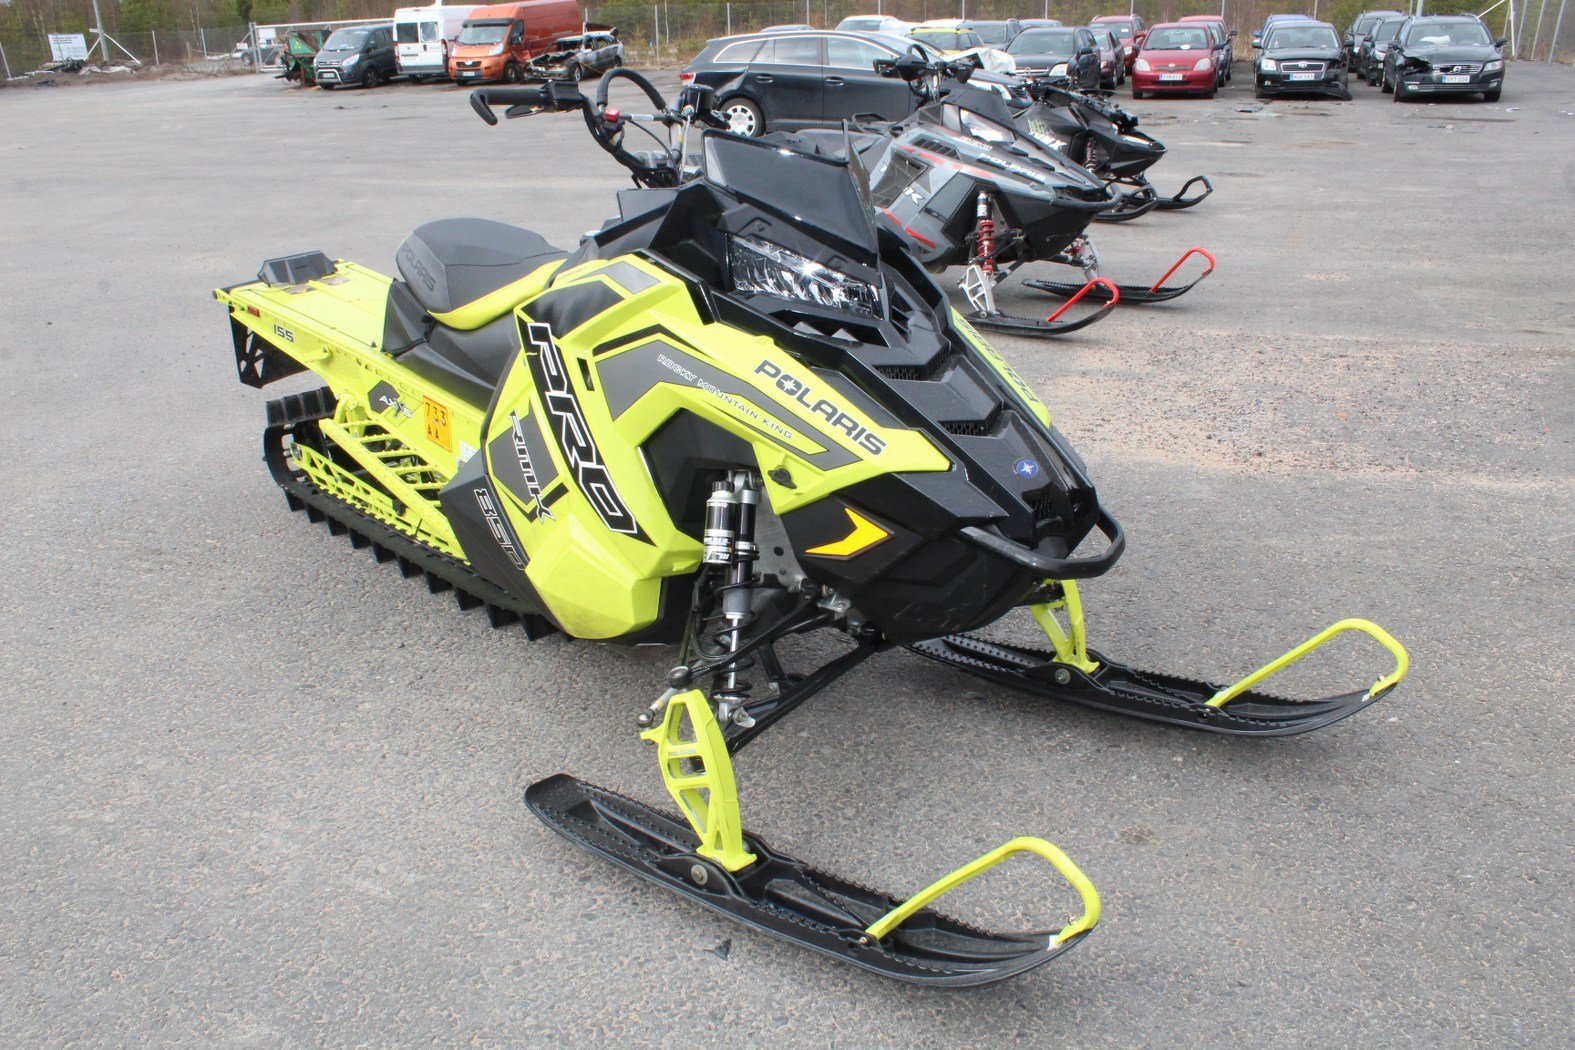 Photos For 19 Polaris Pro Rmk 850 155 Auction At Oulu On Thursday May 28 Copart Finland